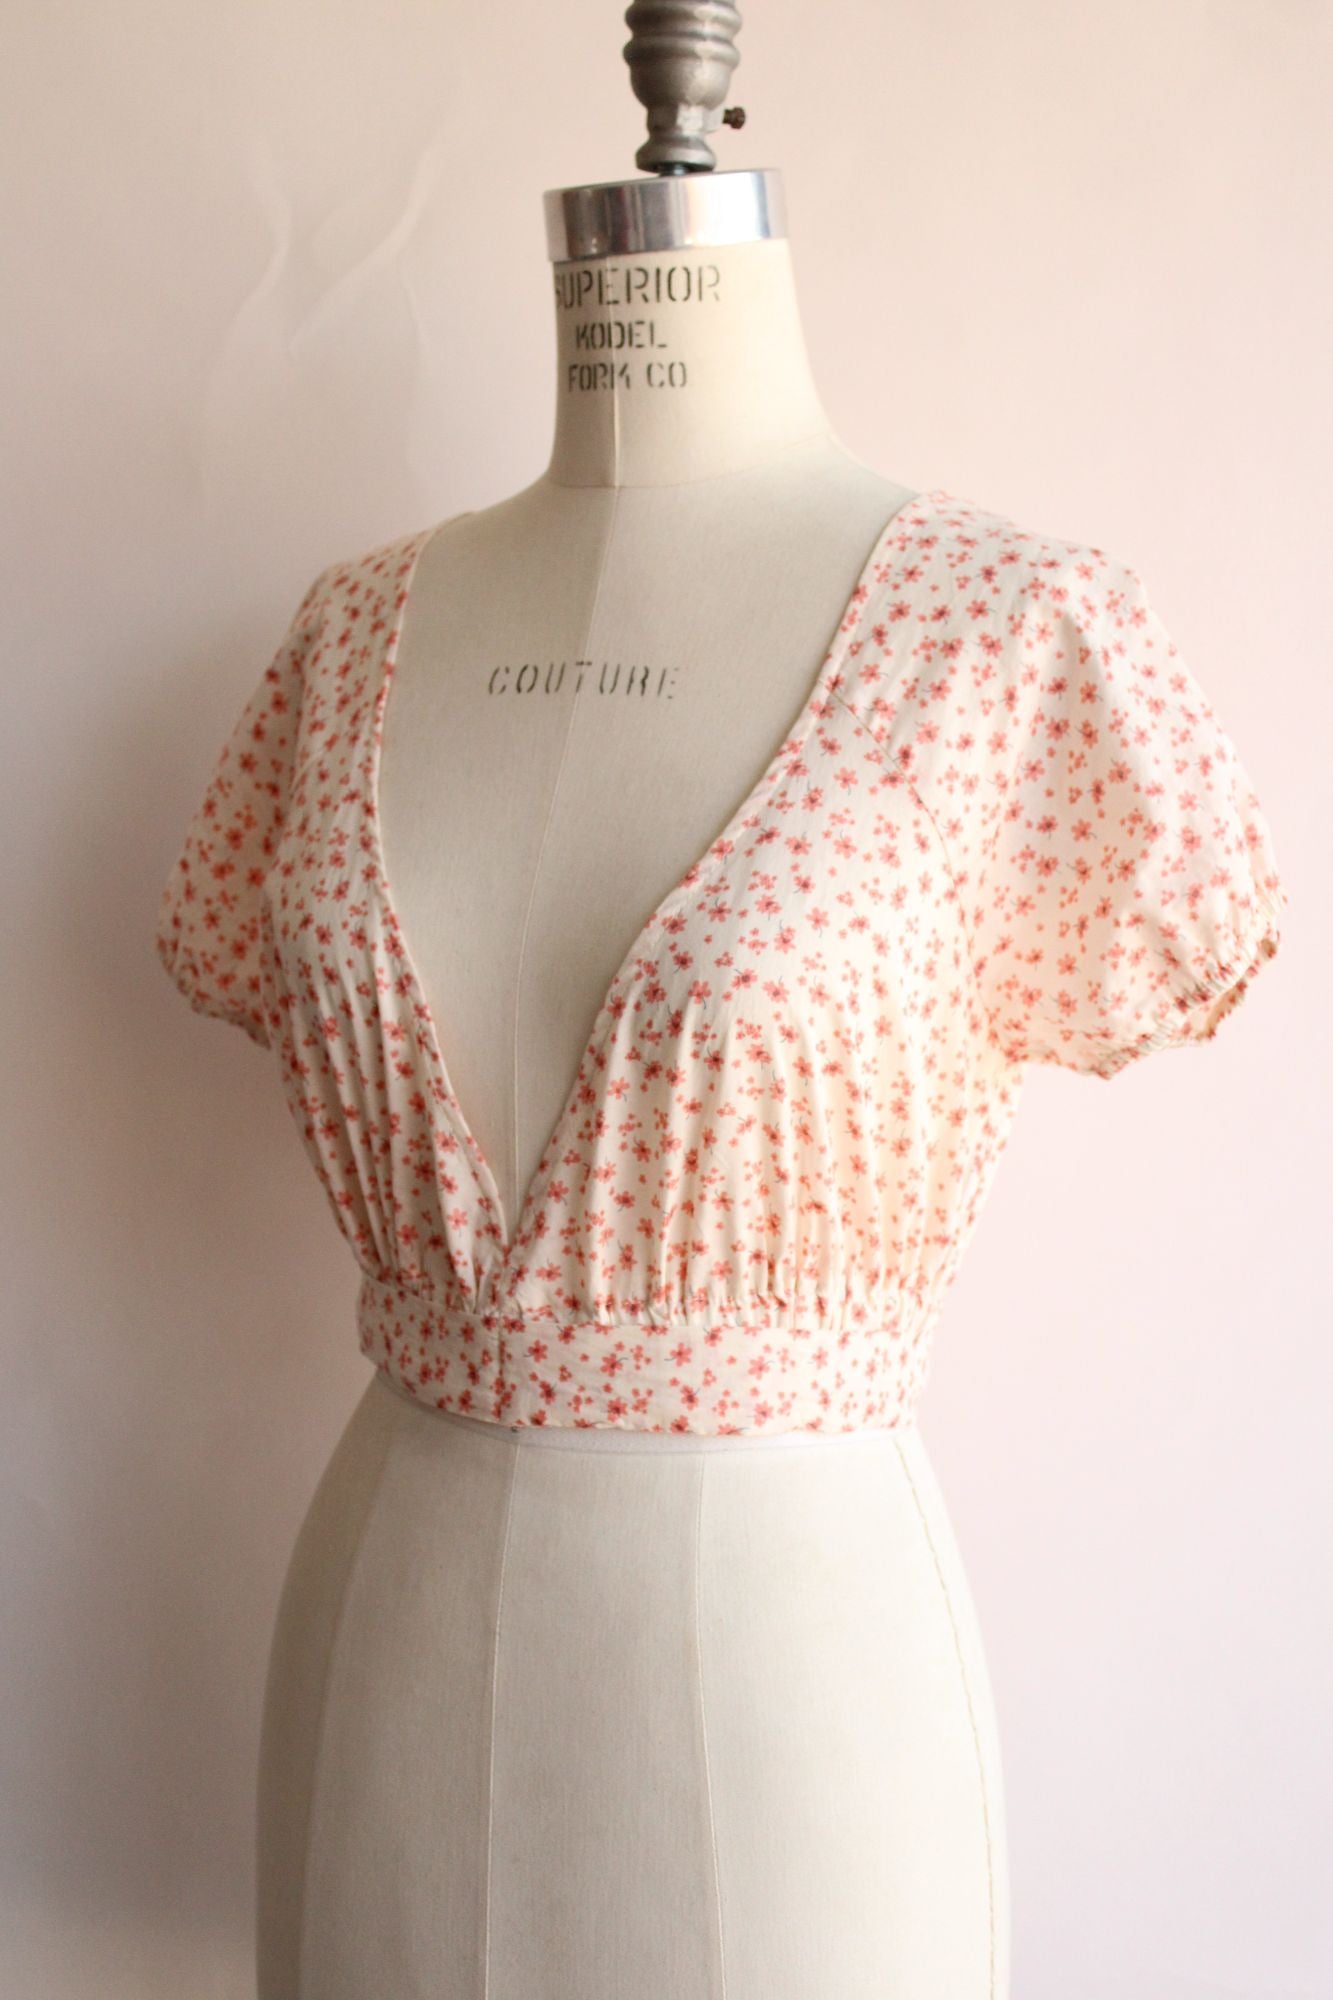 Tillys Womens Crop Top, NWT, Size Large, Coral and Cream Floral, Tie Waist, New